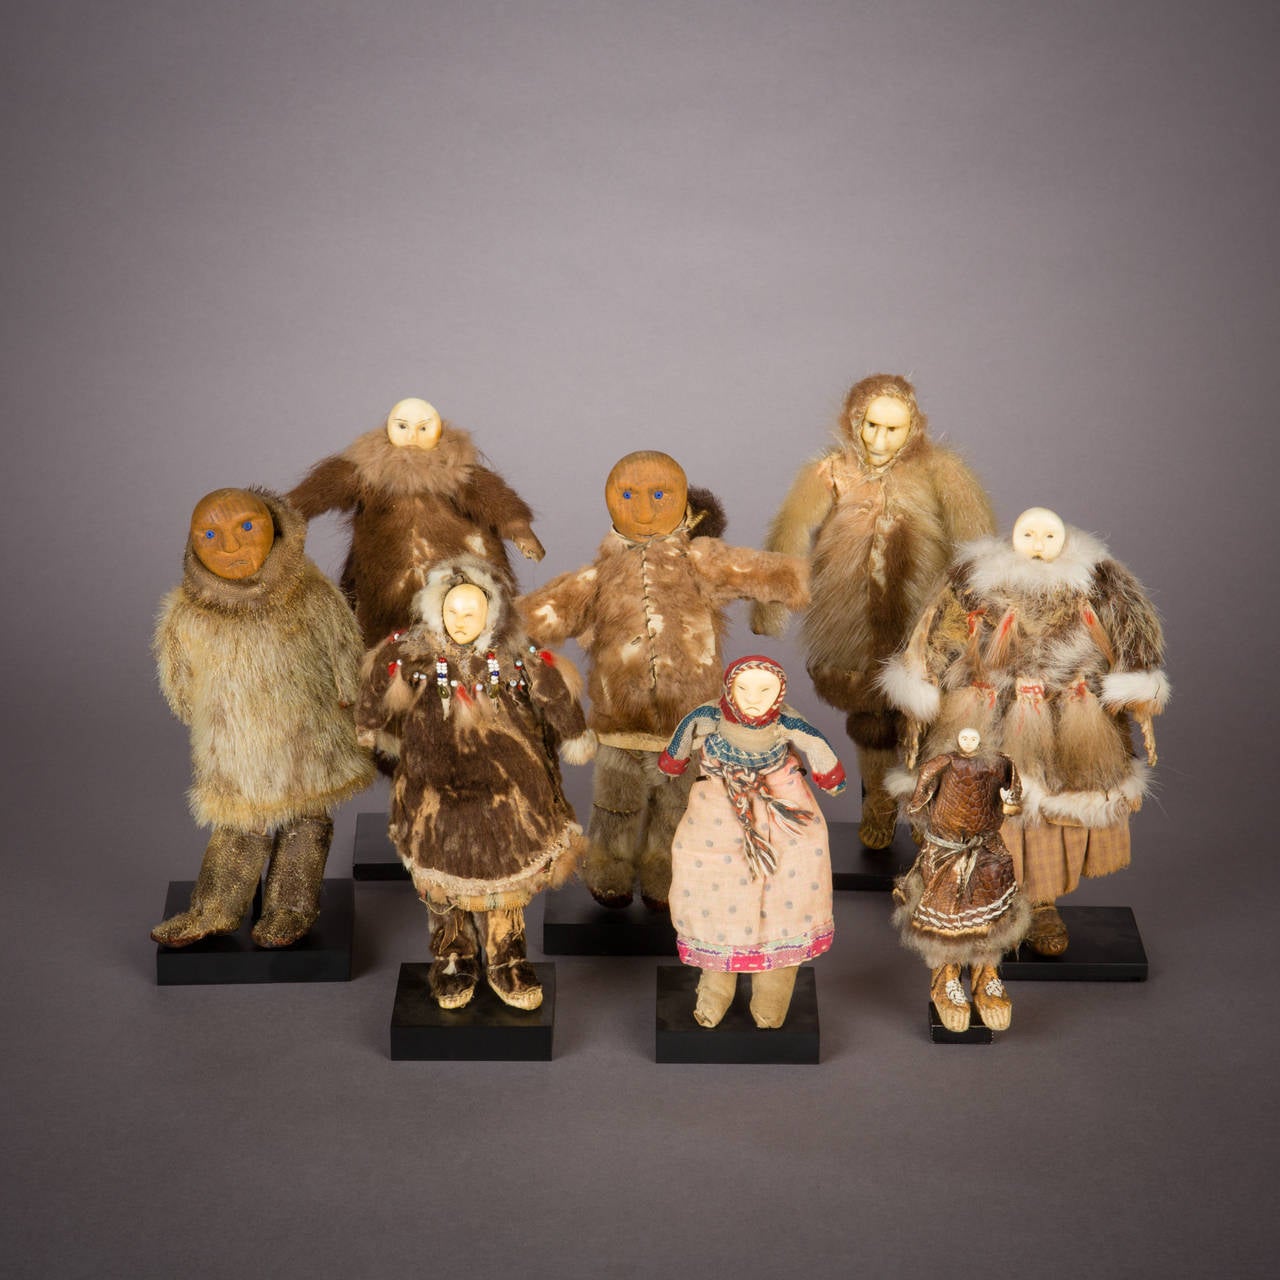 Young girls in Alaska, like girls in countless cultures the world over, played with dolls. Yup'ik girls usually owned a number of dolls made for them by her fathers, commonly in sets of five: Father, mother, daughter, son, and baby. As seen in this